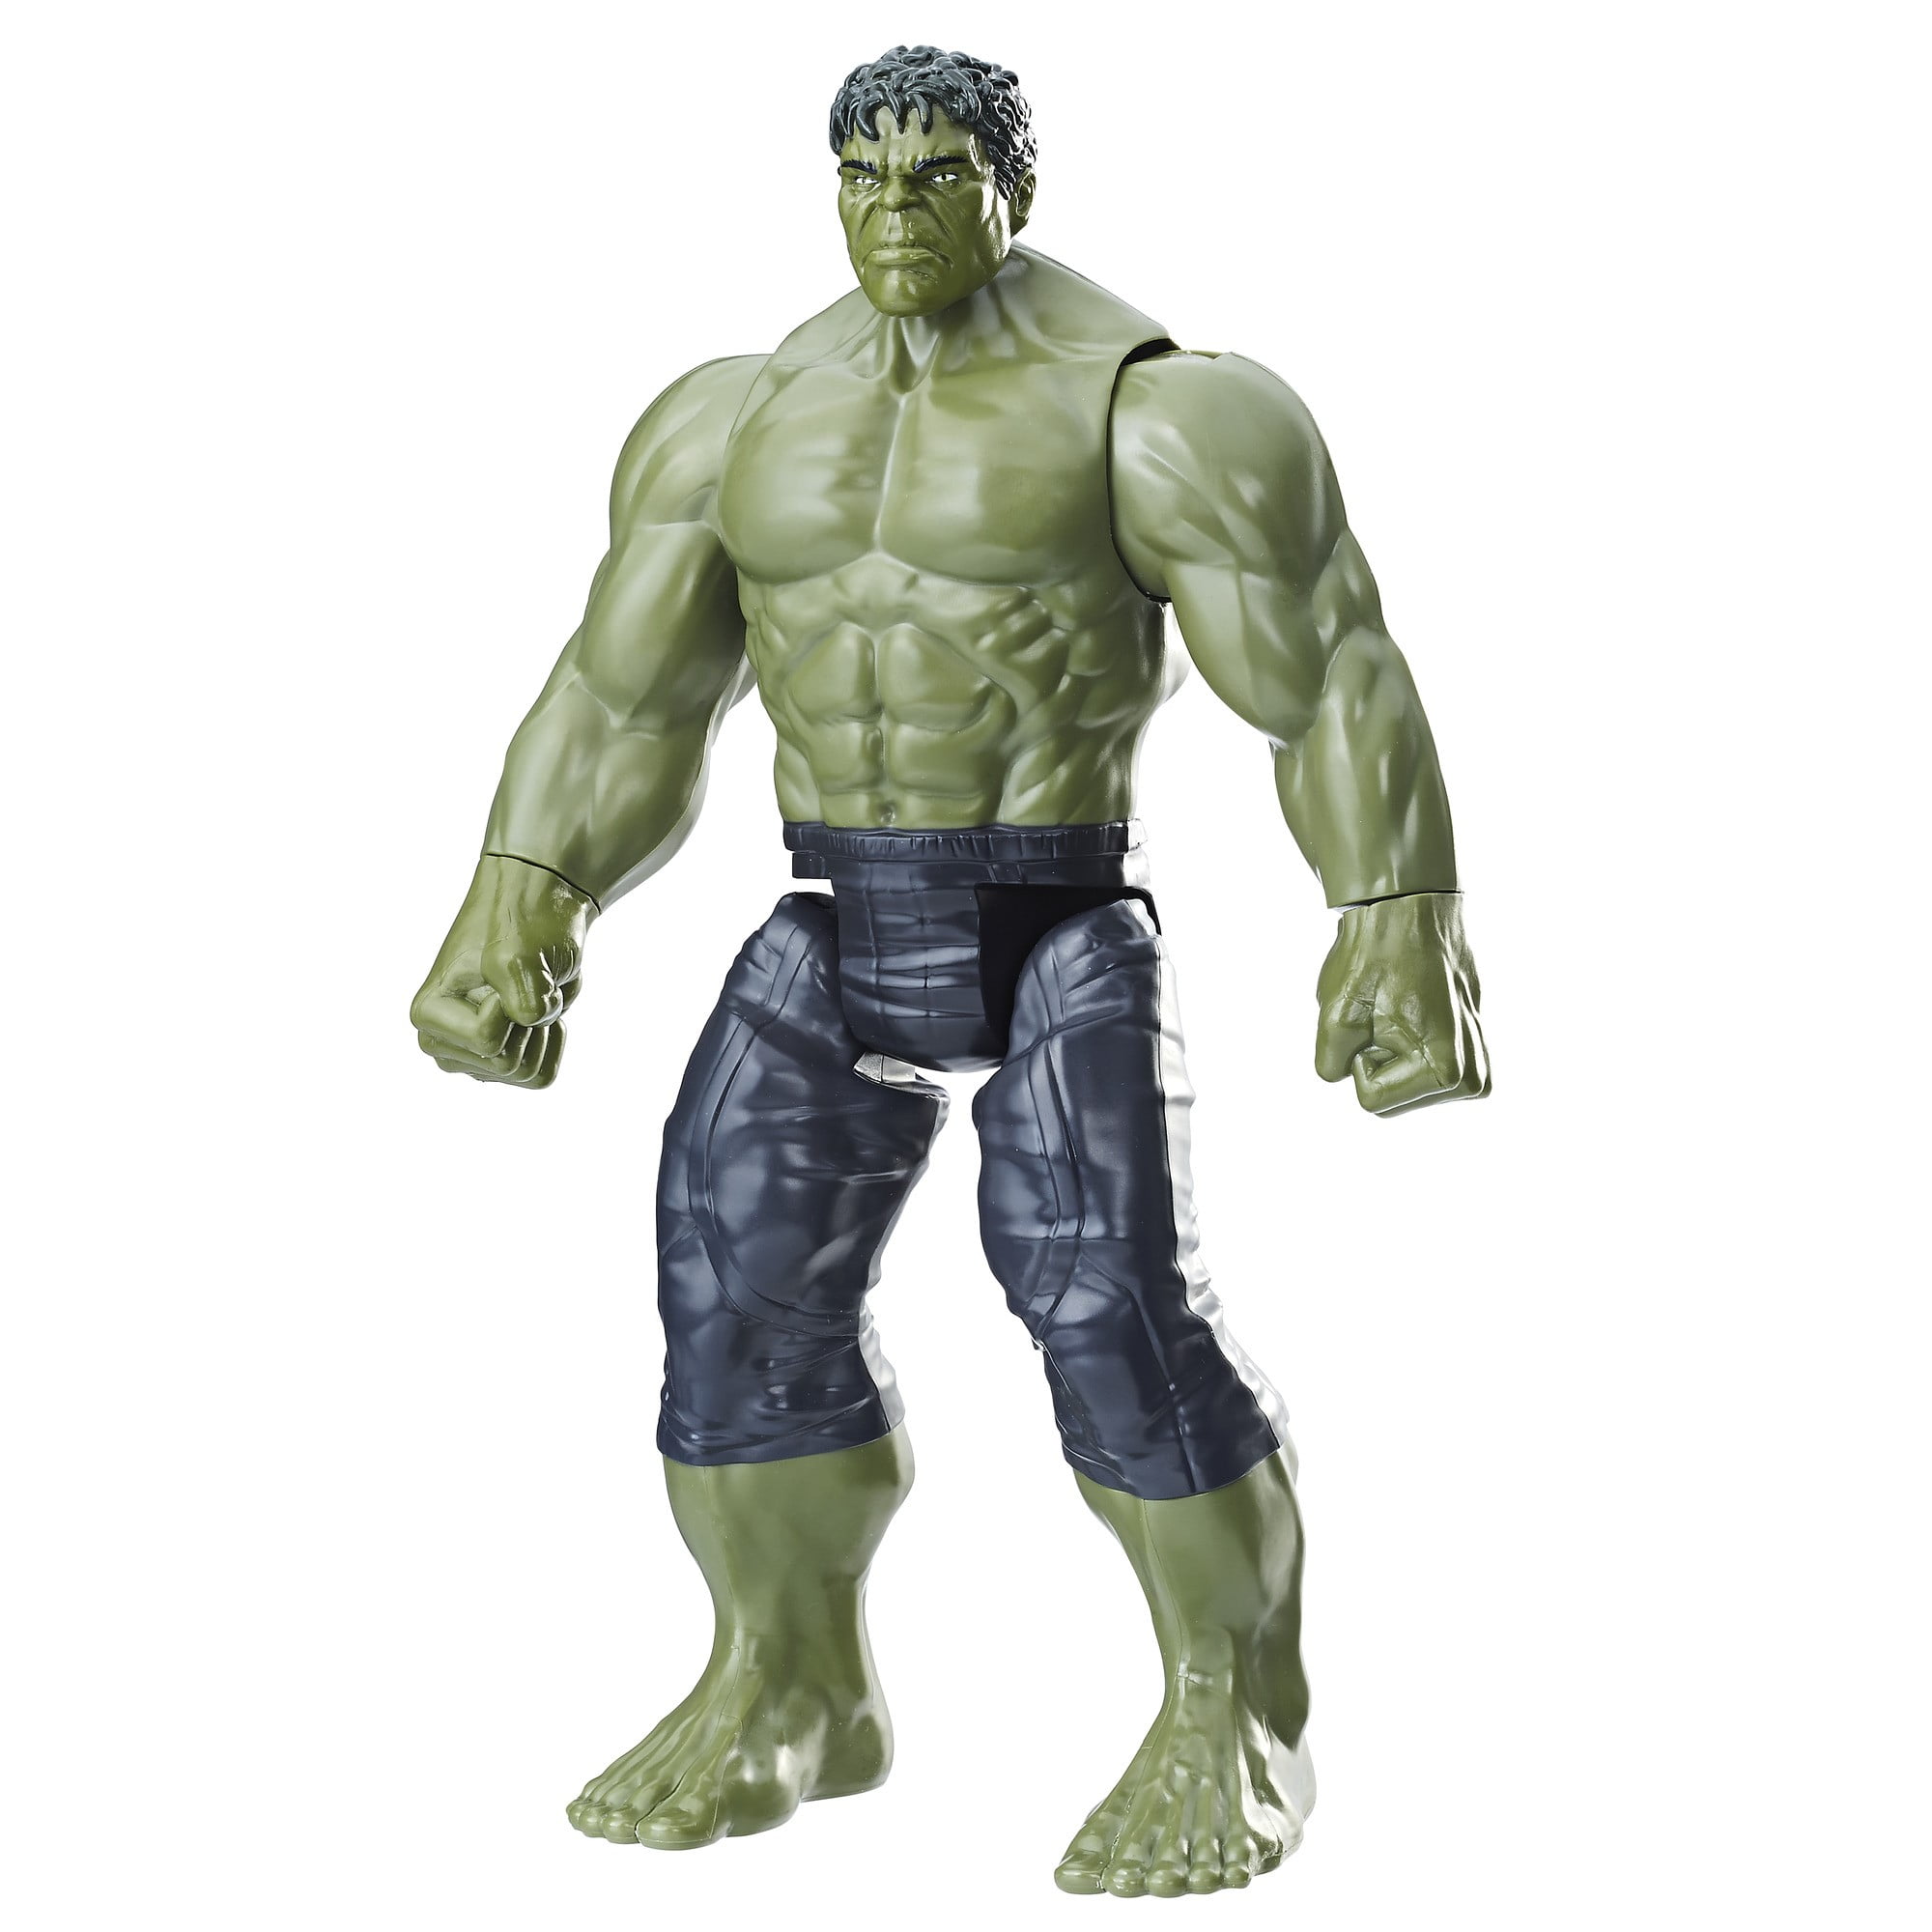 Marvel Avengers Infinity War The Hulk PVC Action Figure Collectible Model Toy 